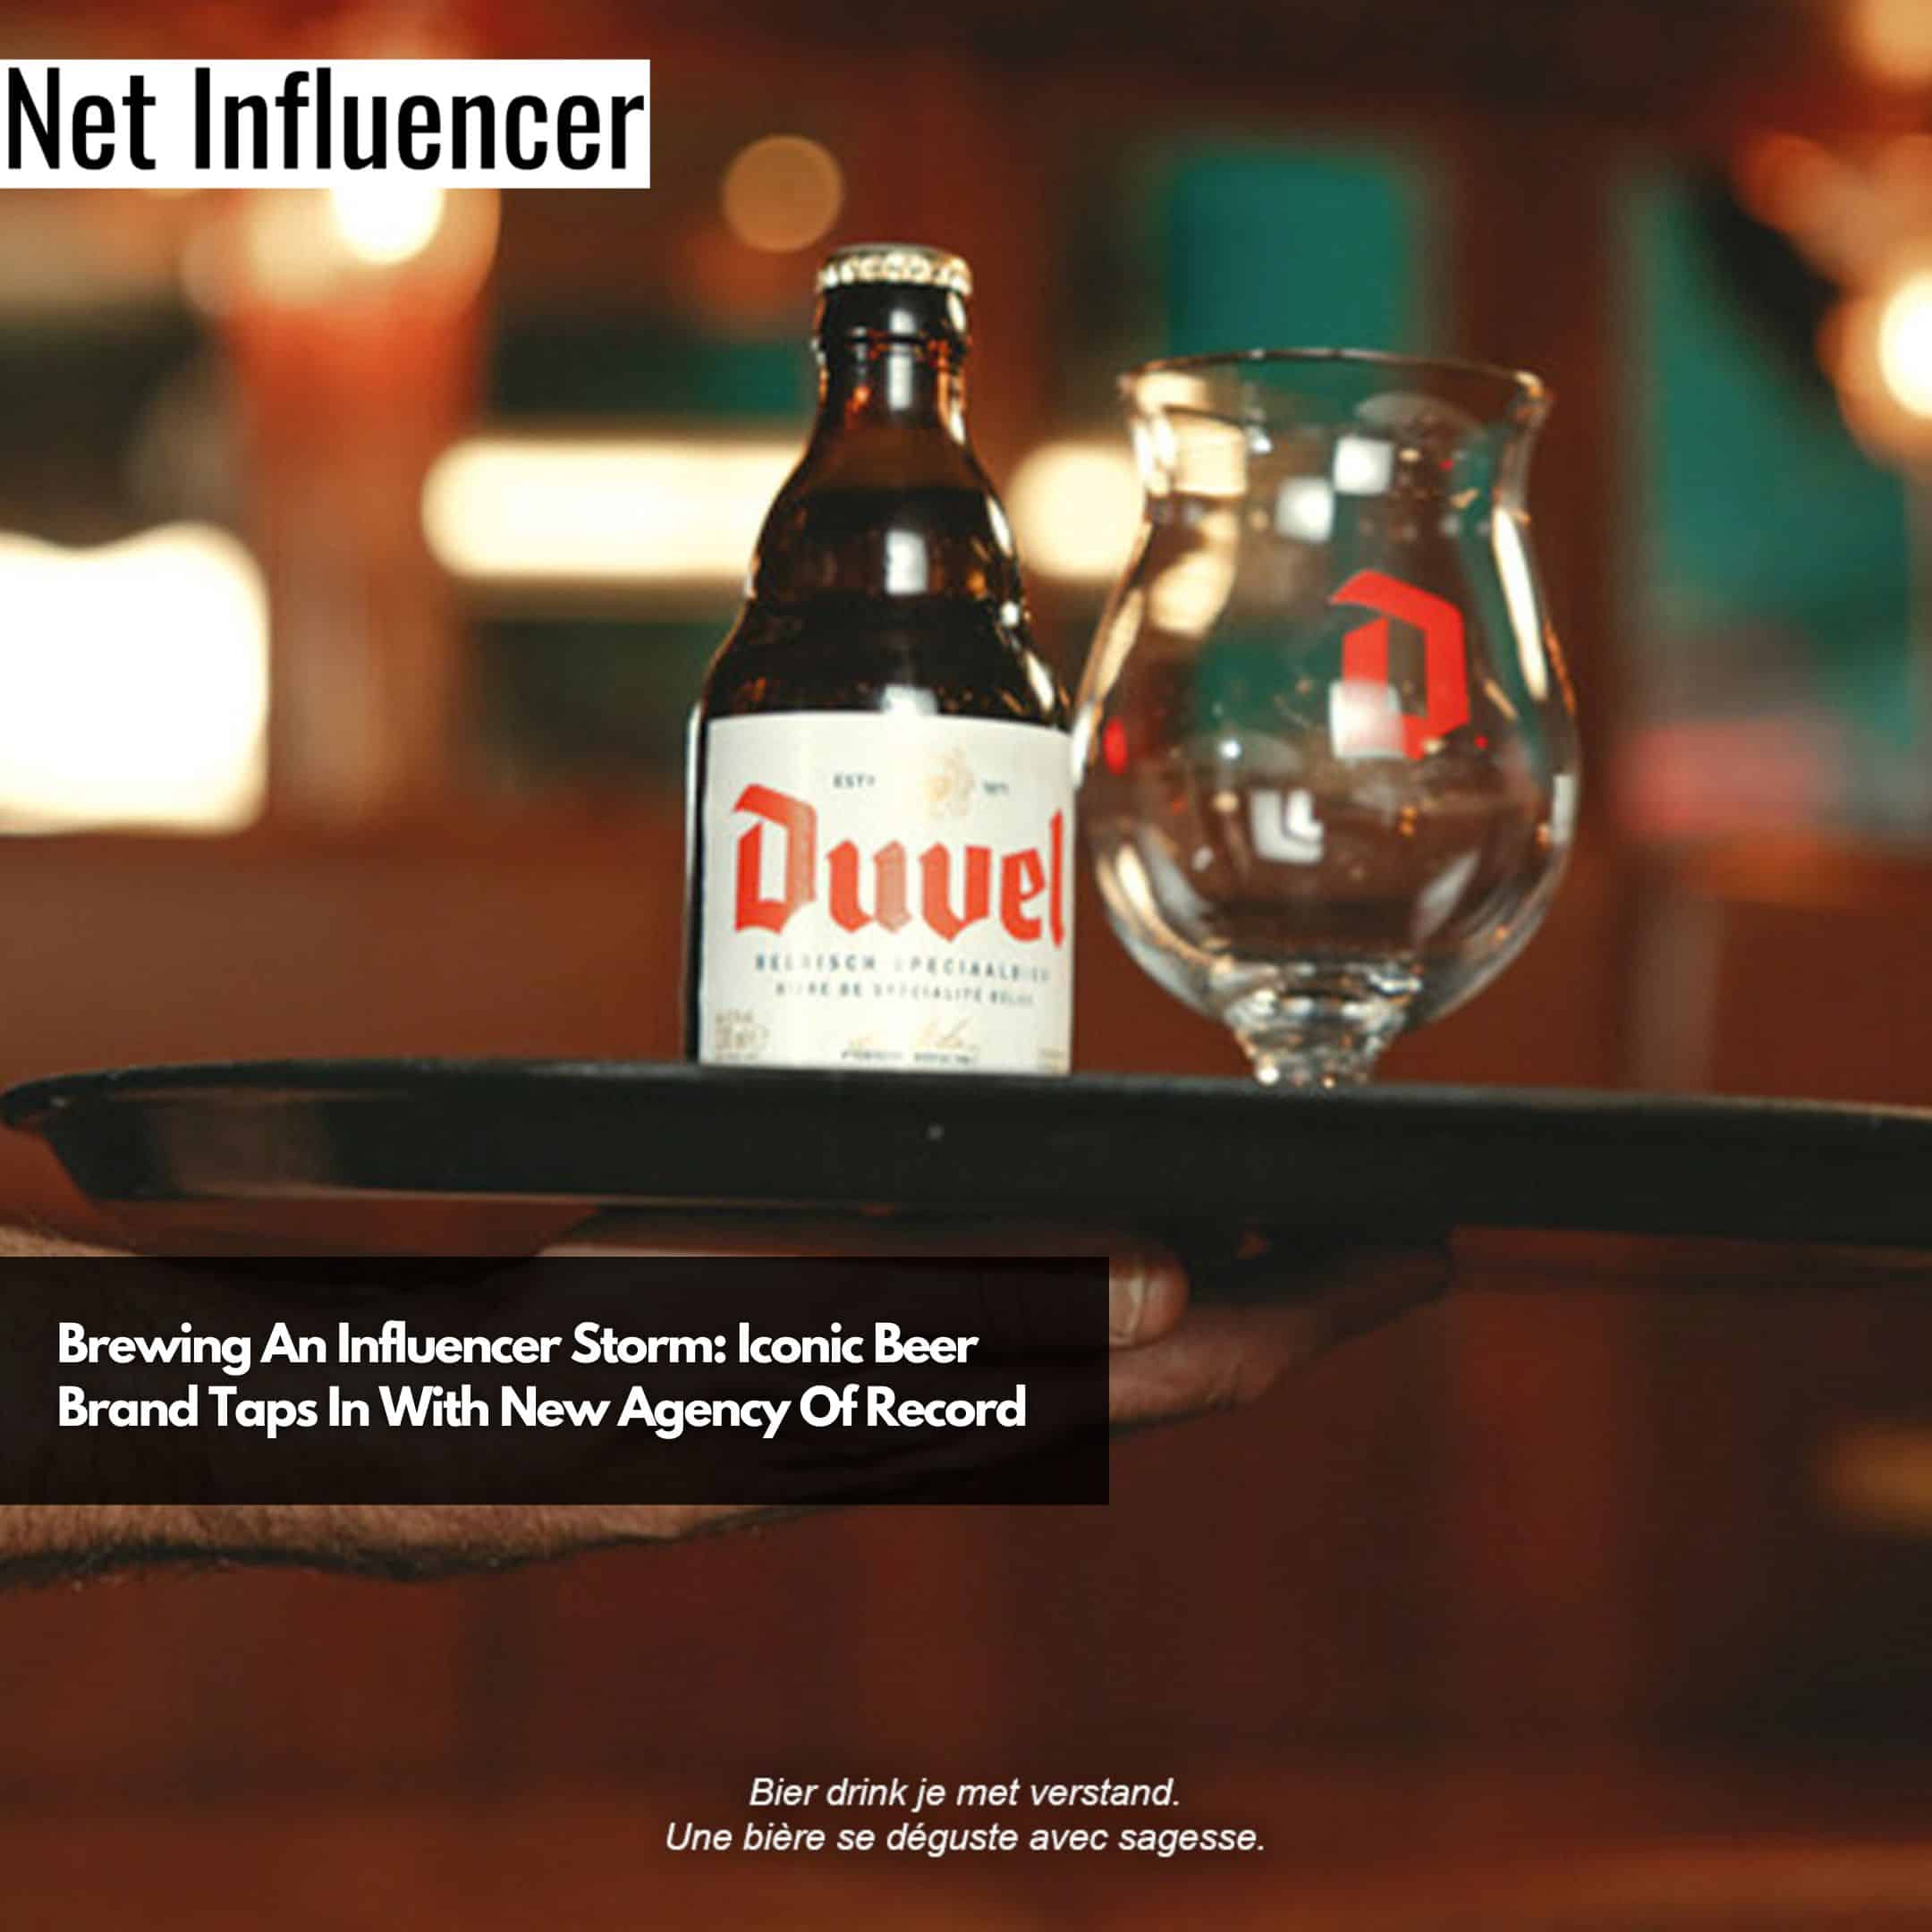 Duvel: Brewing An Influencer Storm Iconic Beer Brand Taps In With New Agency Of Record